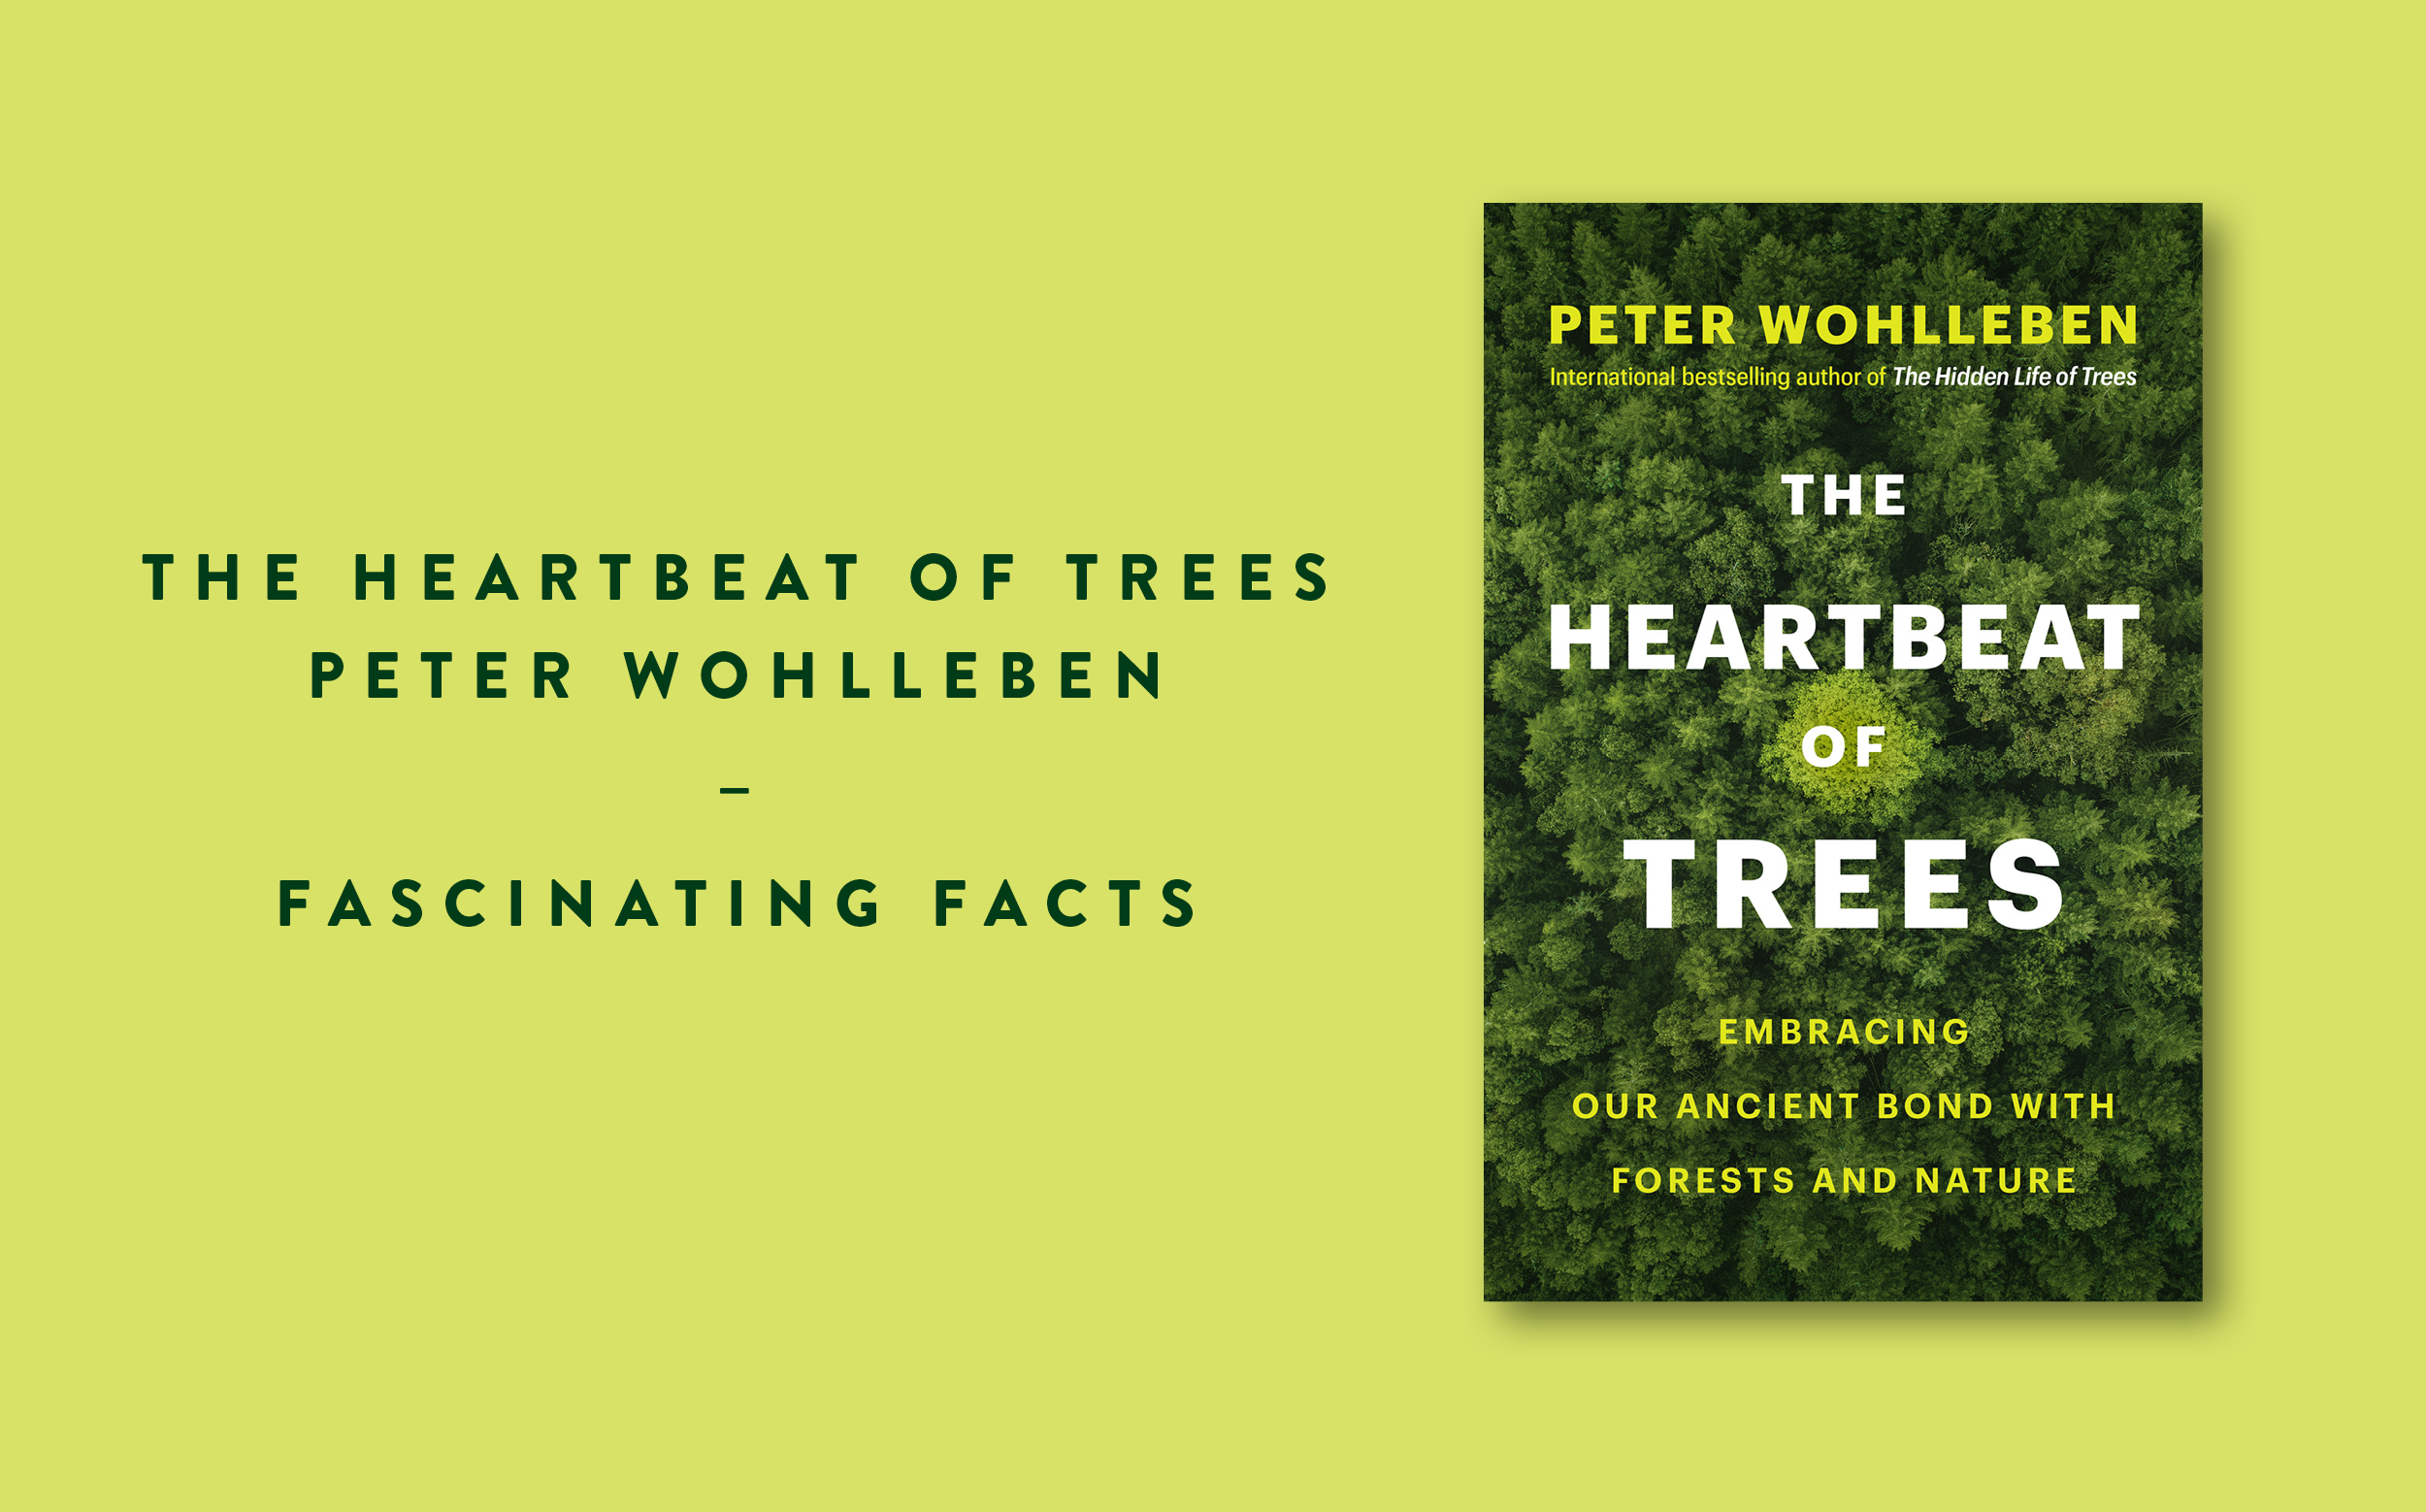 7 things we learnt from The Heartbeat of Trees